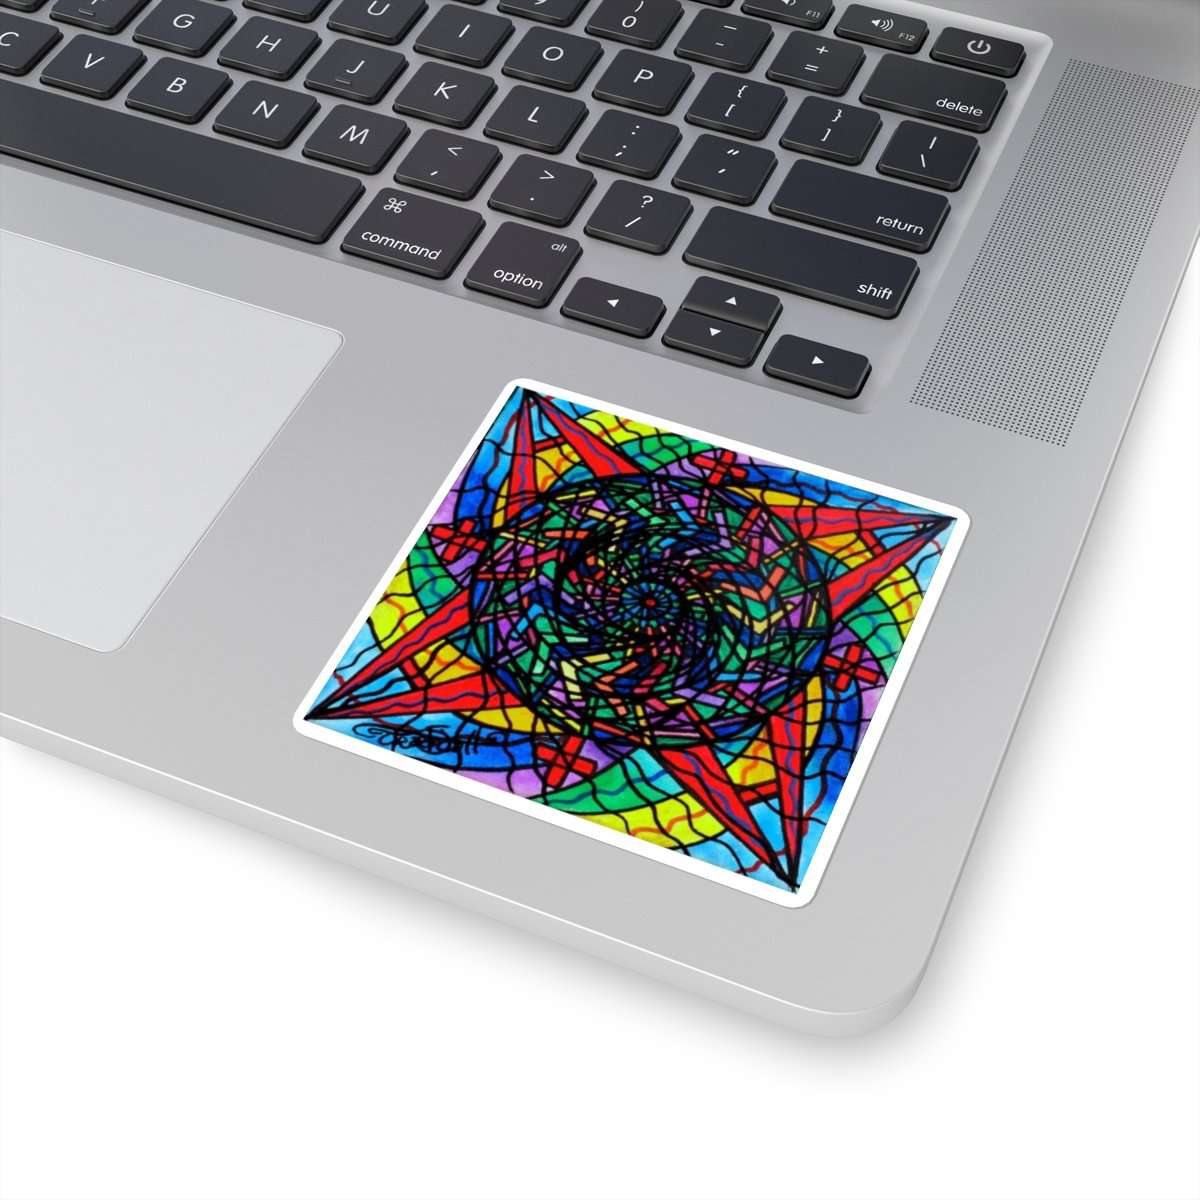 welcome-to-buy-academic-fulfillment-square-stickers-online-hot-sale_3.jpg